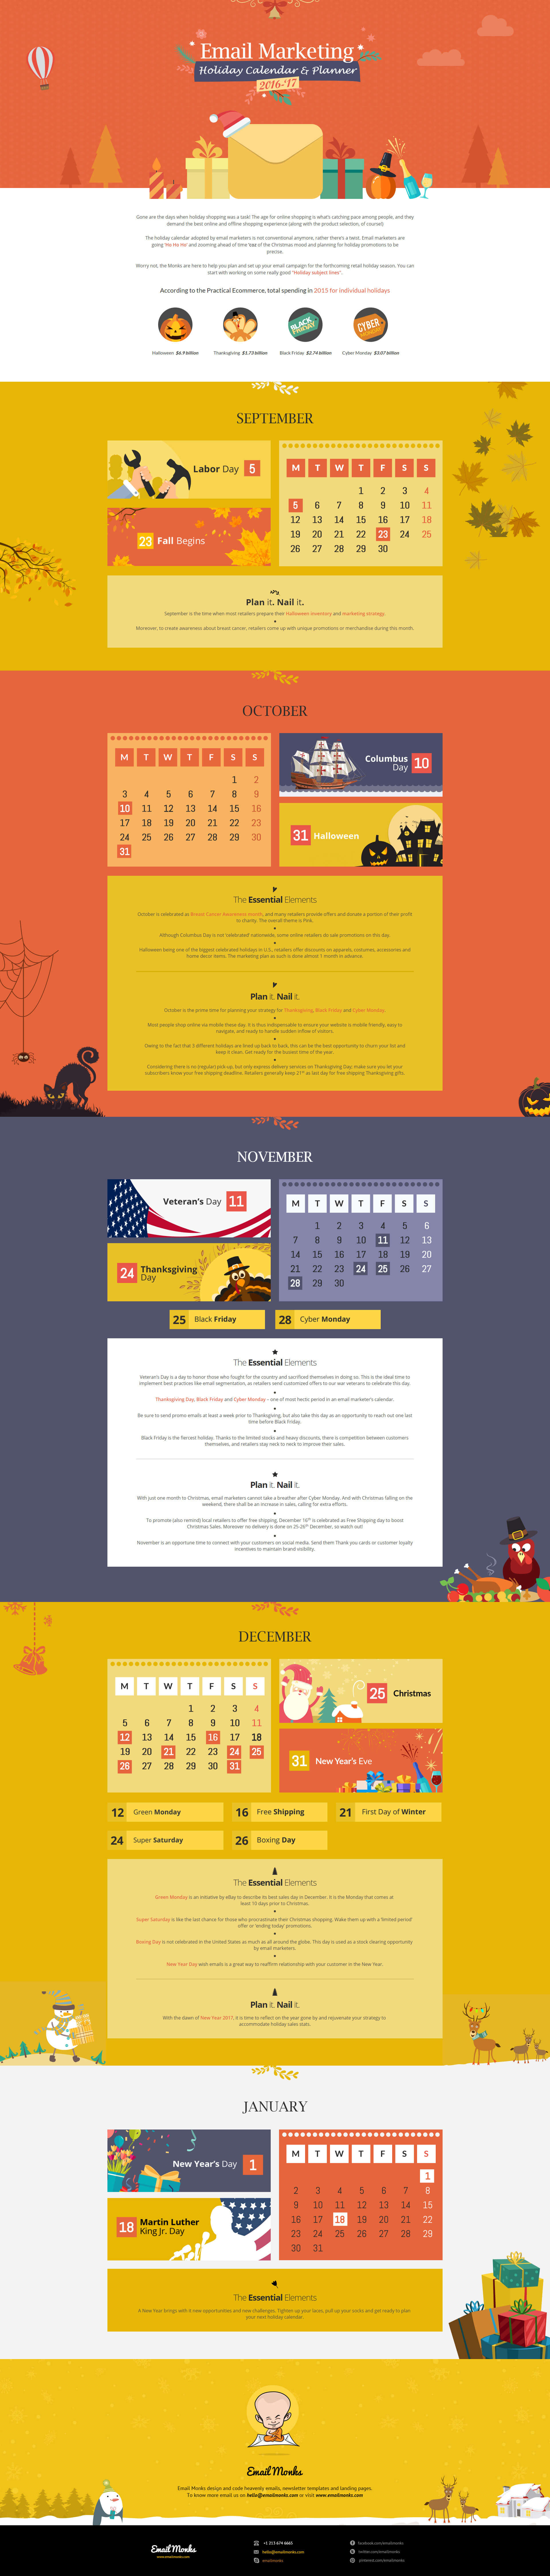 email-marketing-holiday-calendar-infographic-plaza